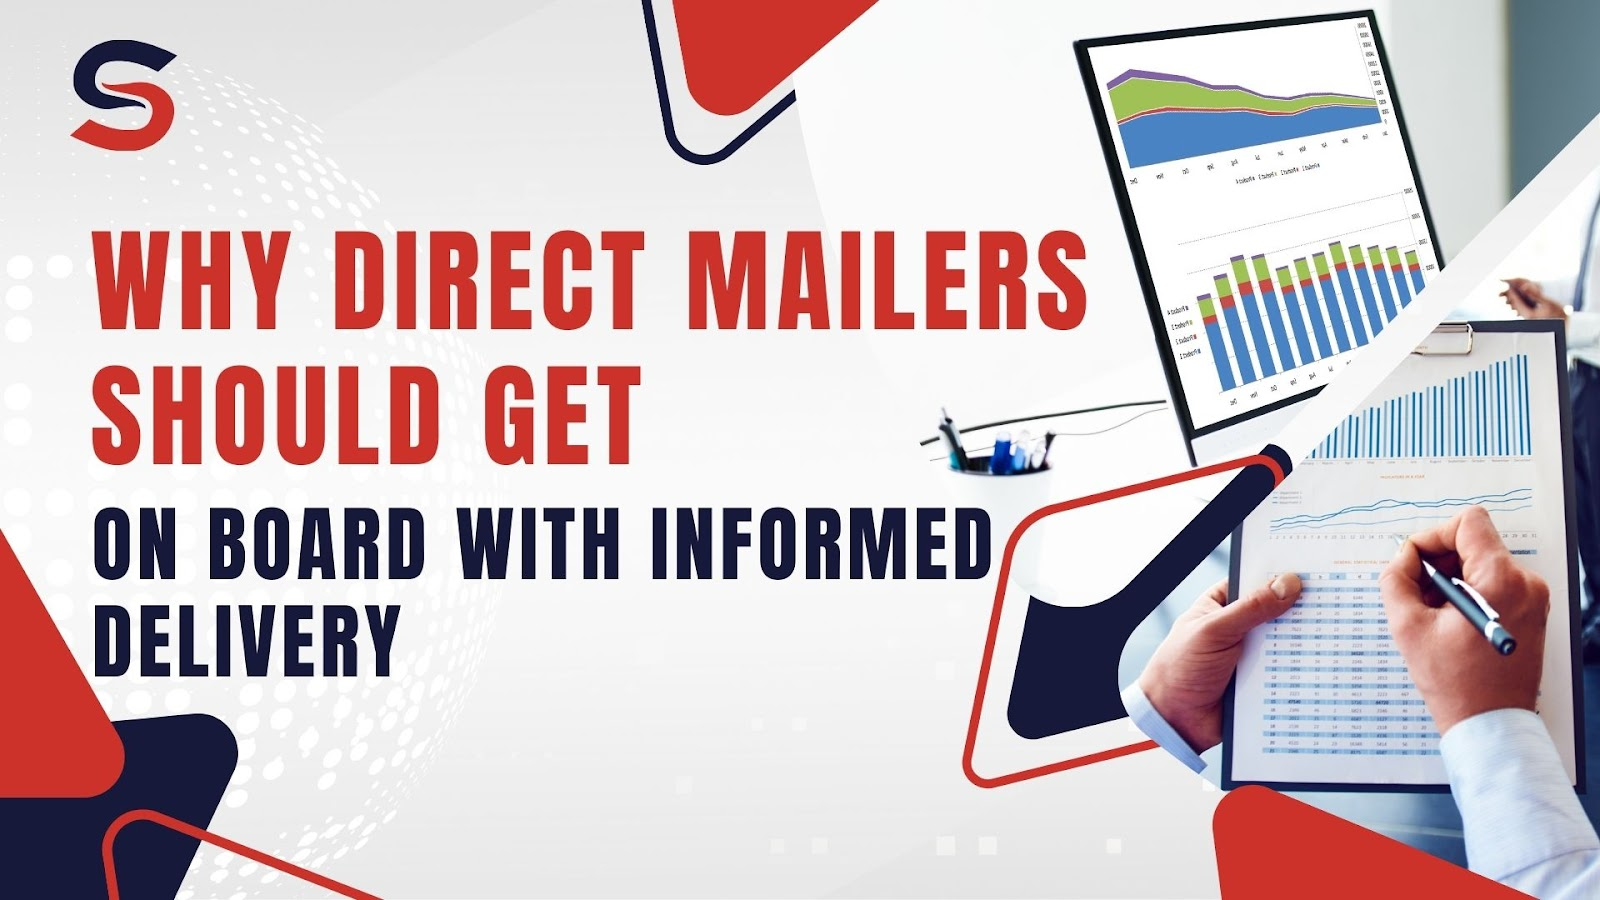 Informed Delivery usps tracking service receives an email